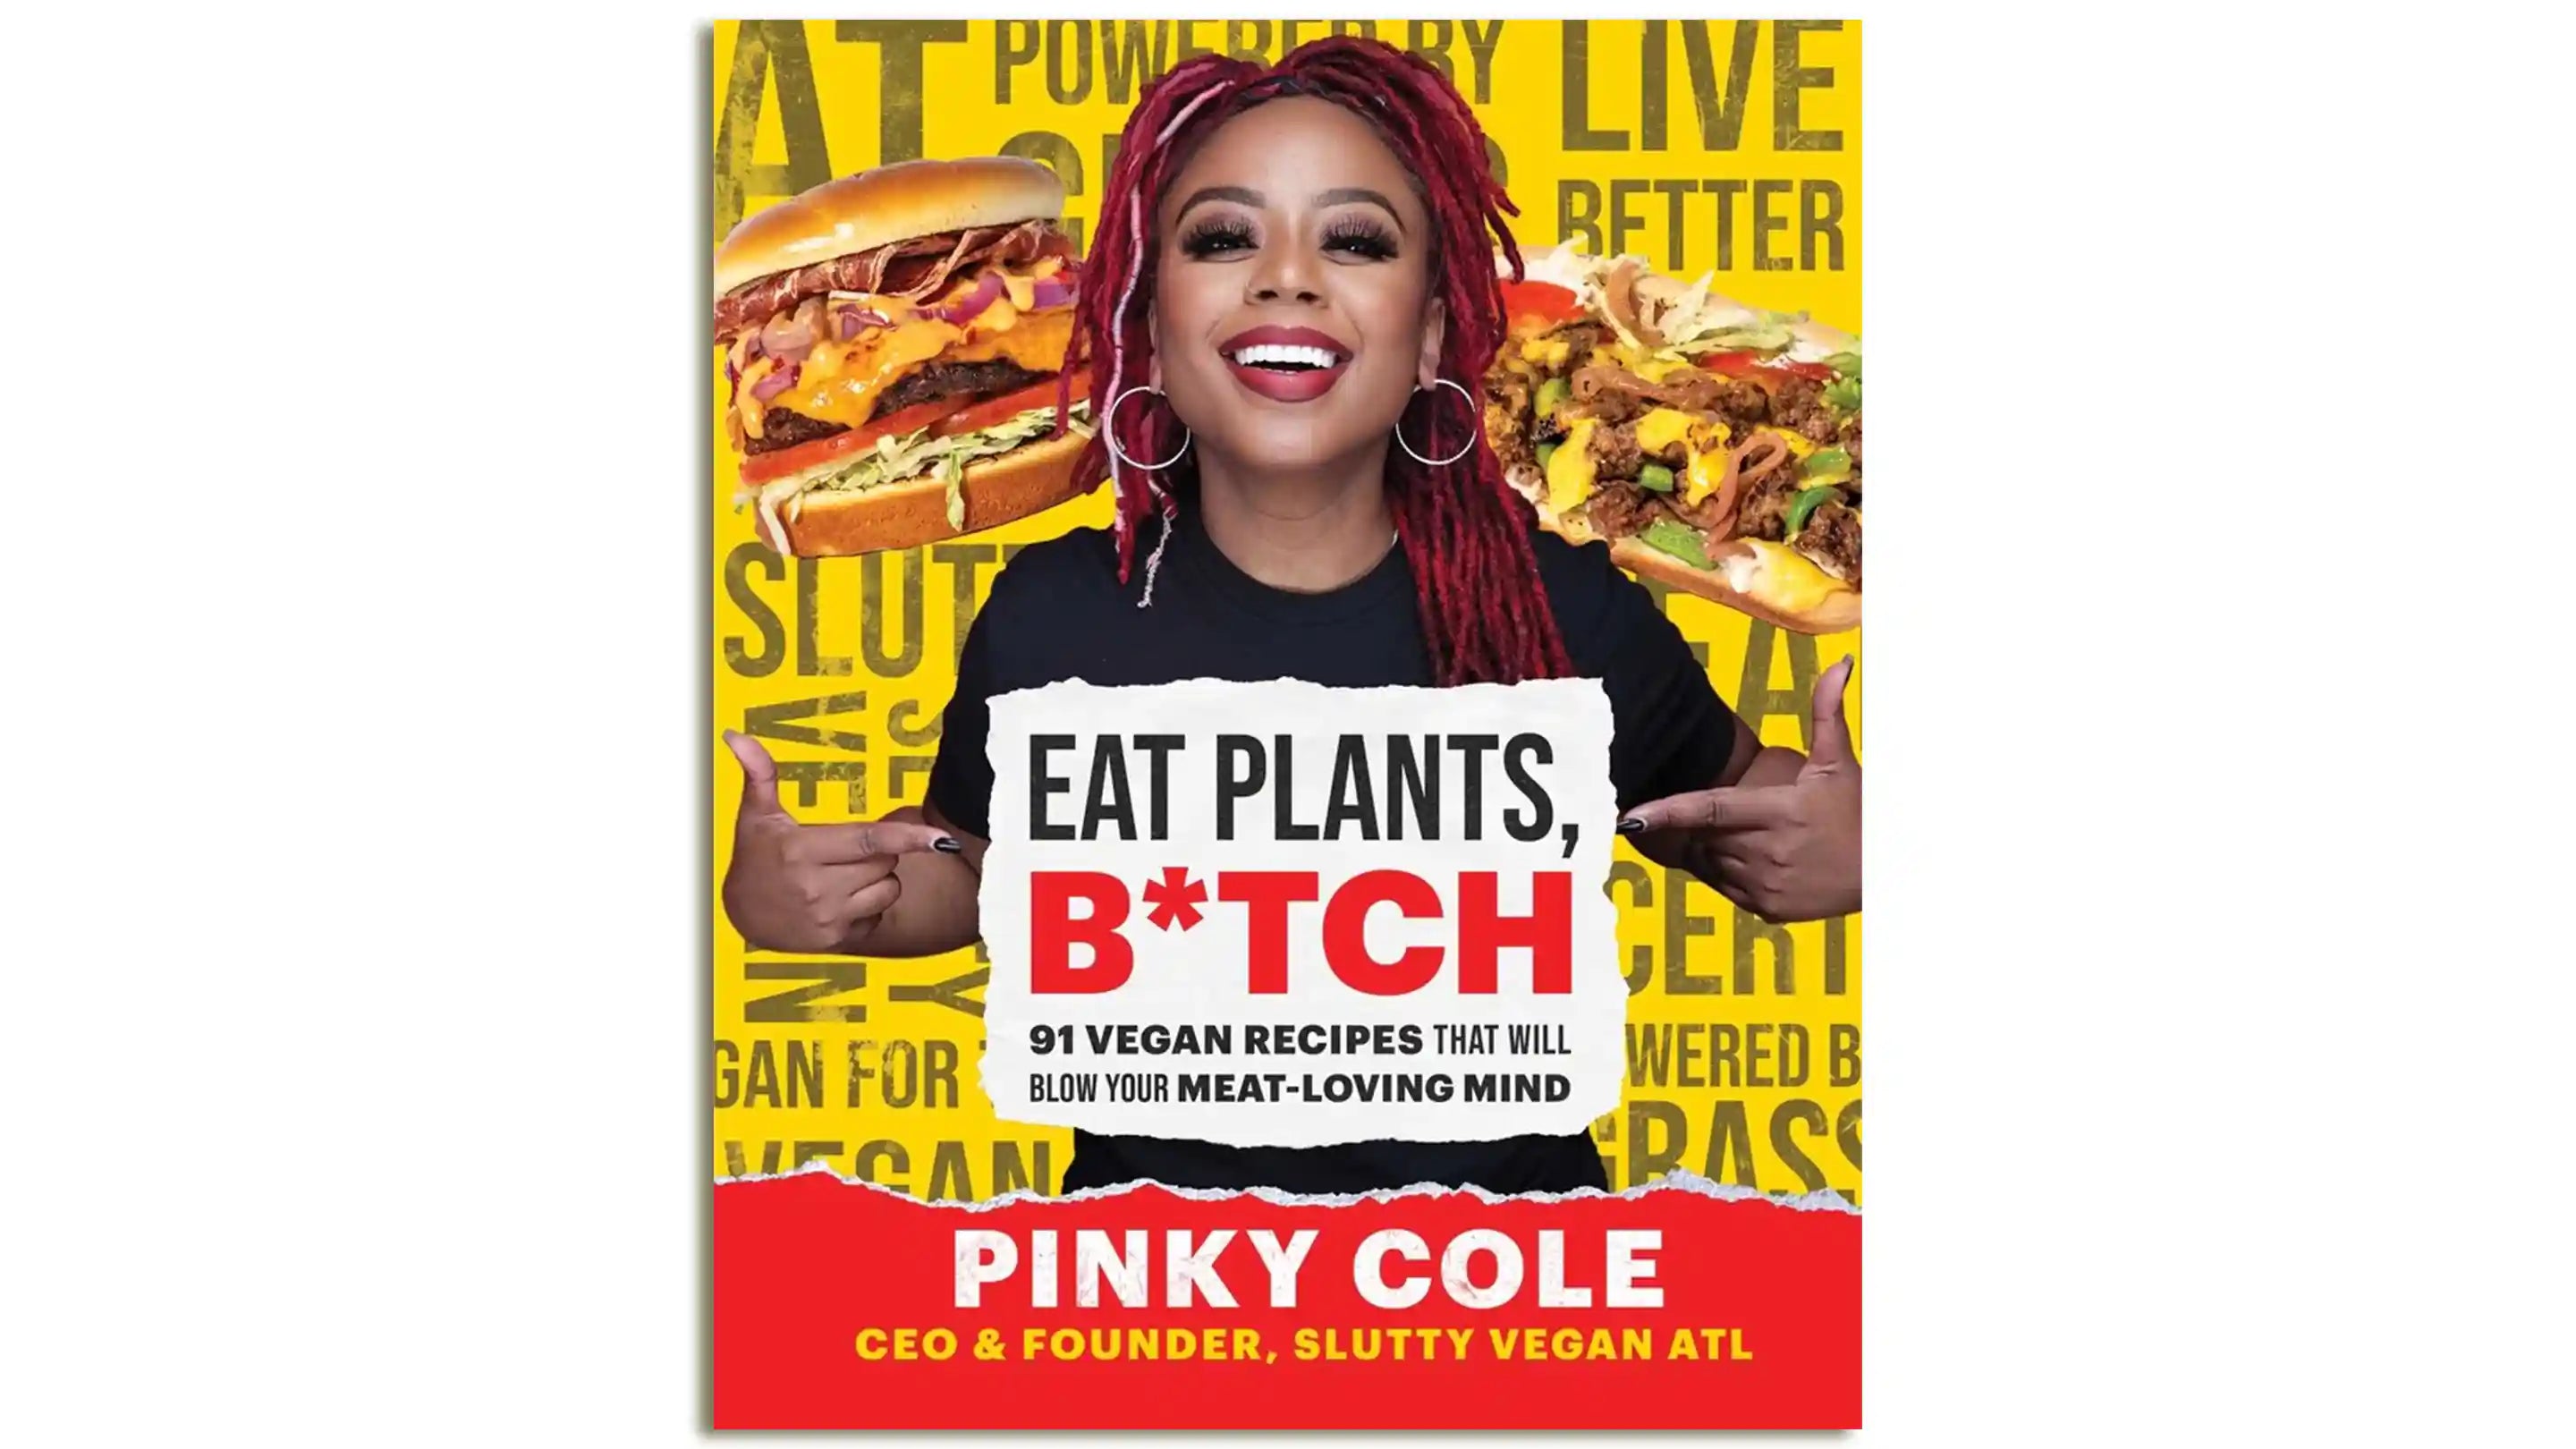 A book on a white background. The book is called "Eat Plants Bitch"